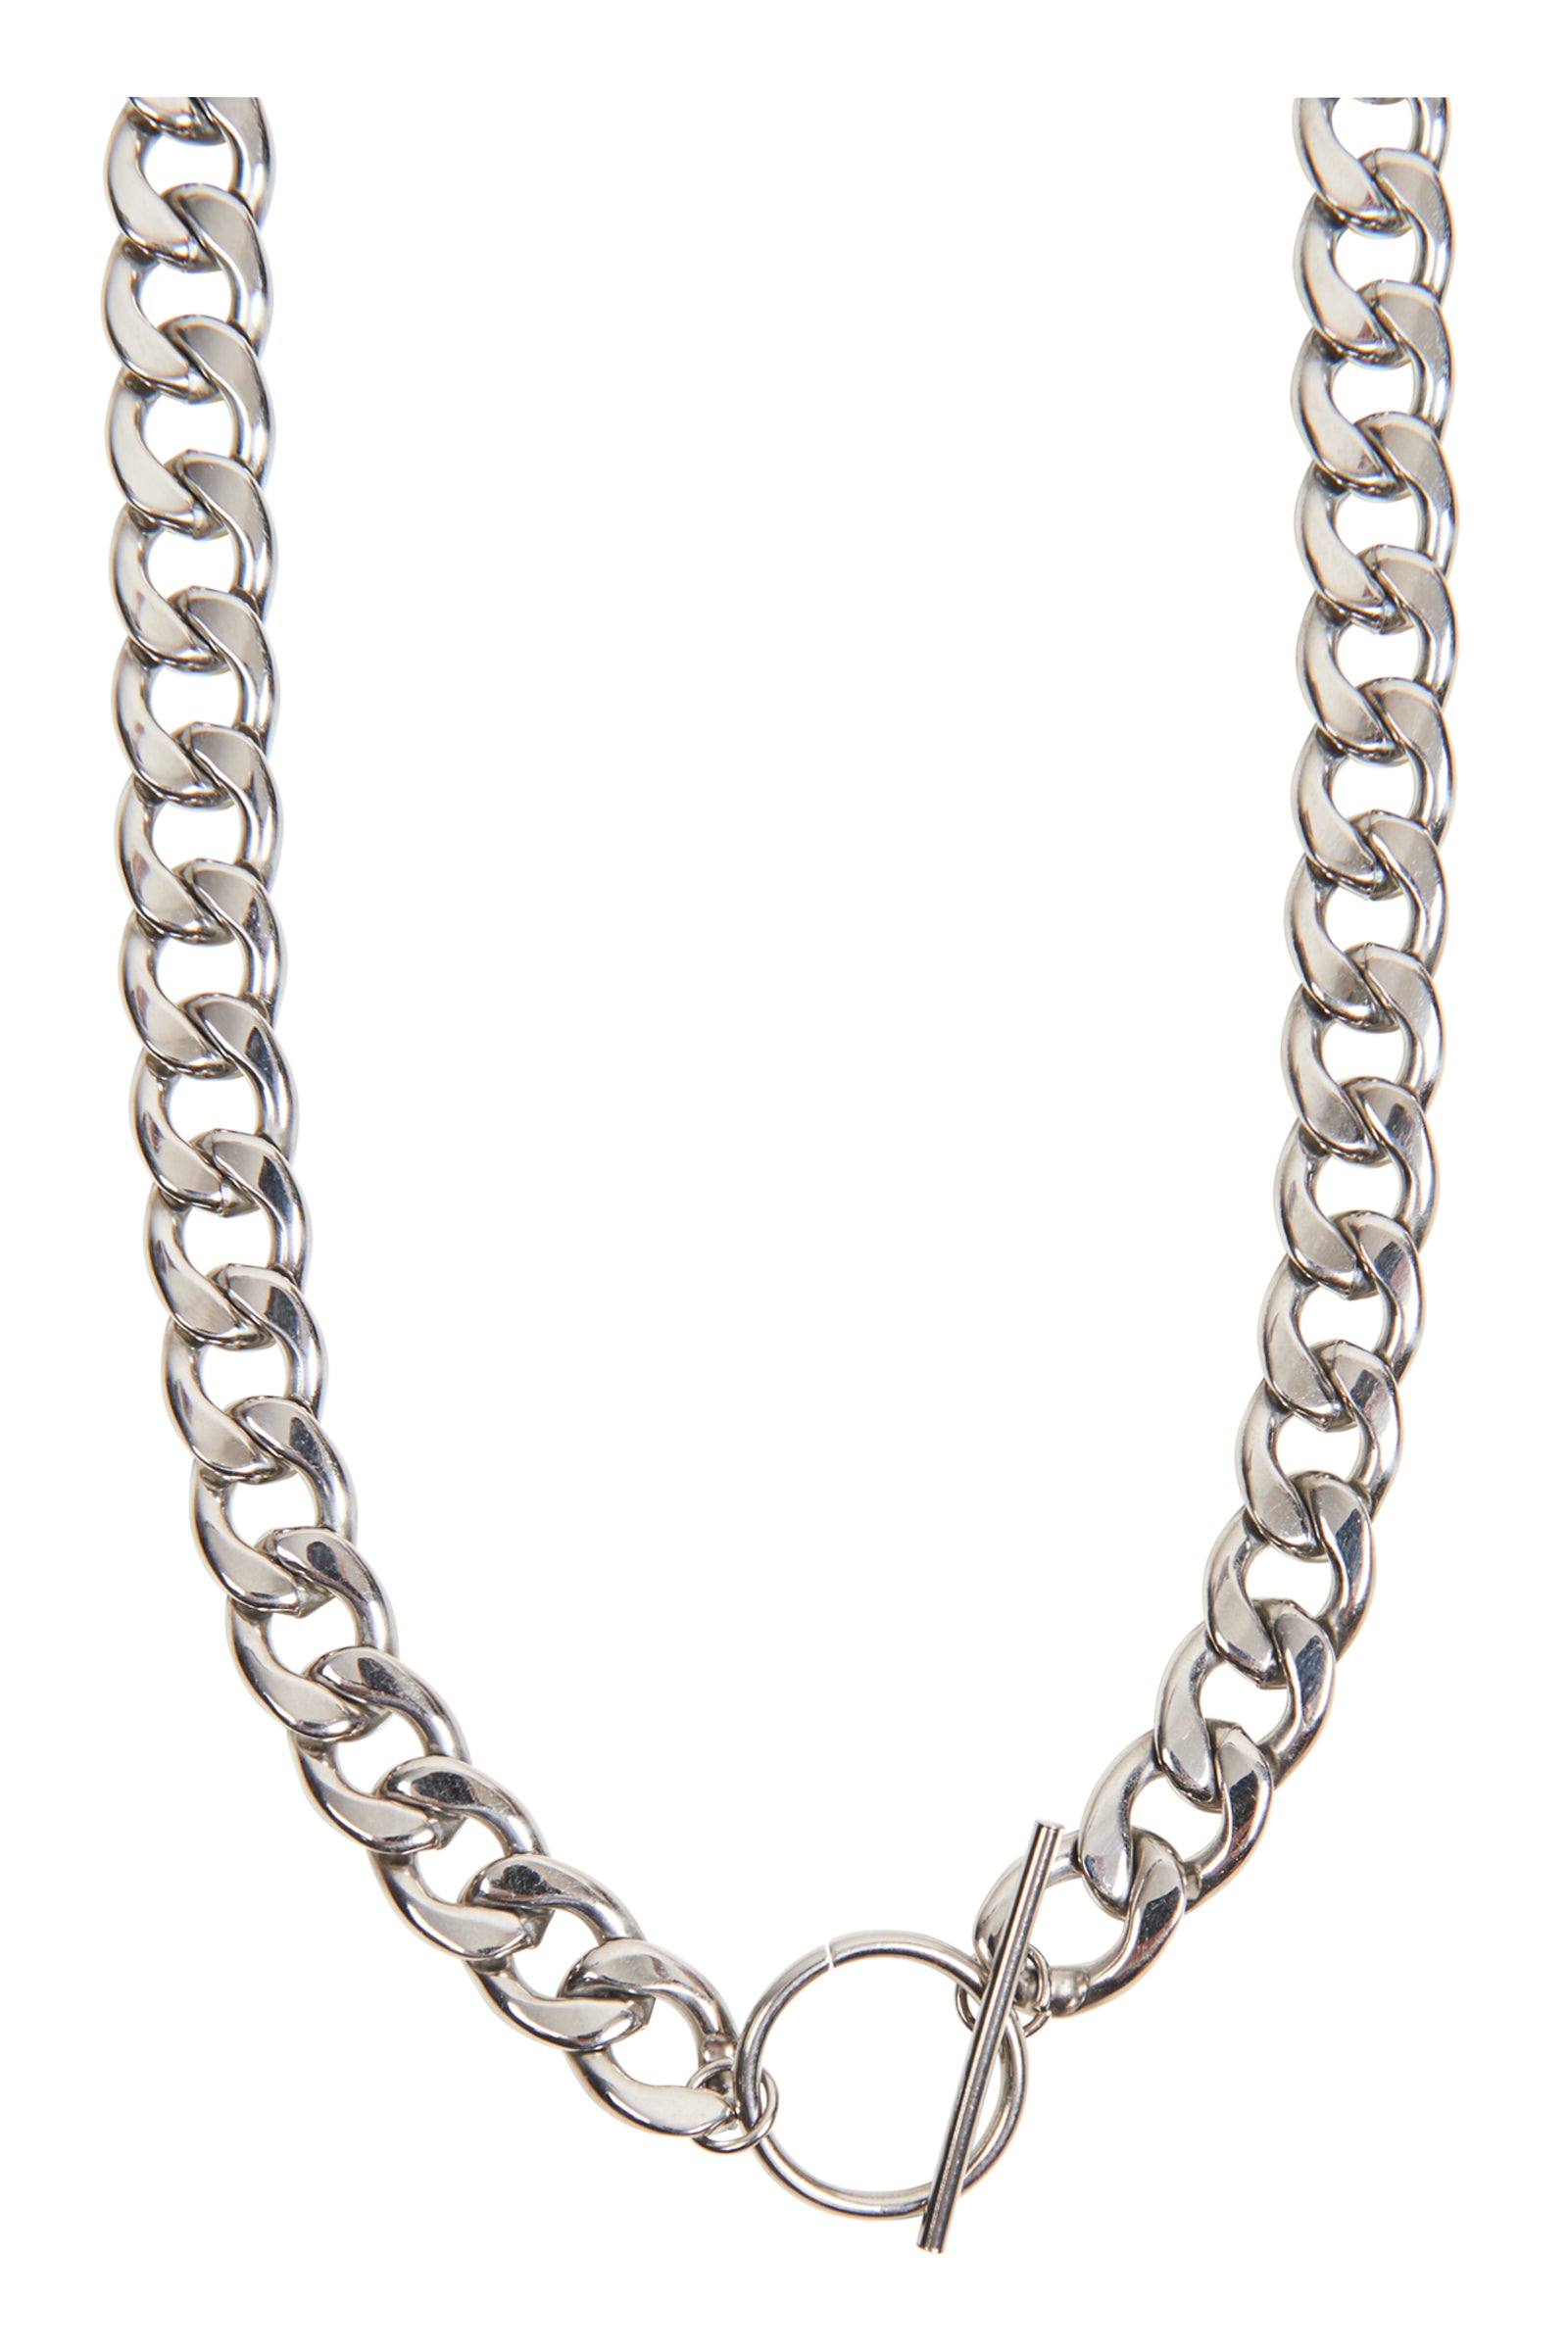 Meta Chain Necklace - Silver - eb&ive Necklace